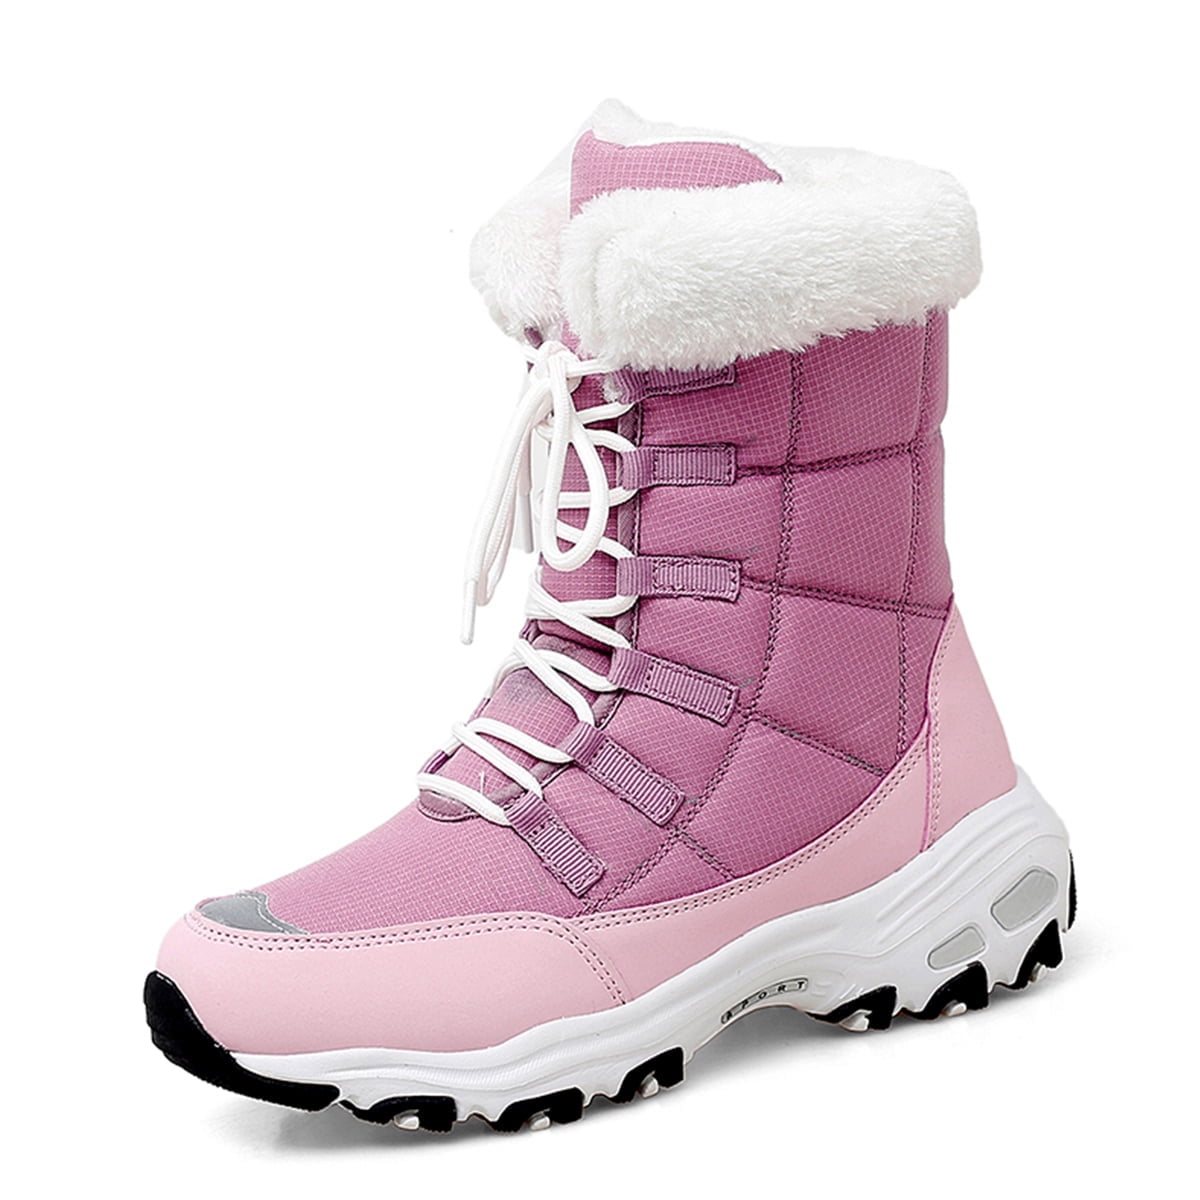 Lopsie Winter Warm Snow Boots for Women Comfortable Faux Fur Lined Outdoor Snow Shoes Waterproof Hiking Boots